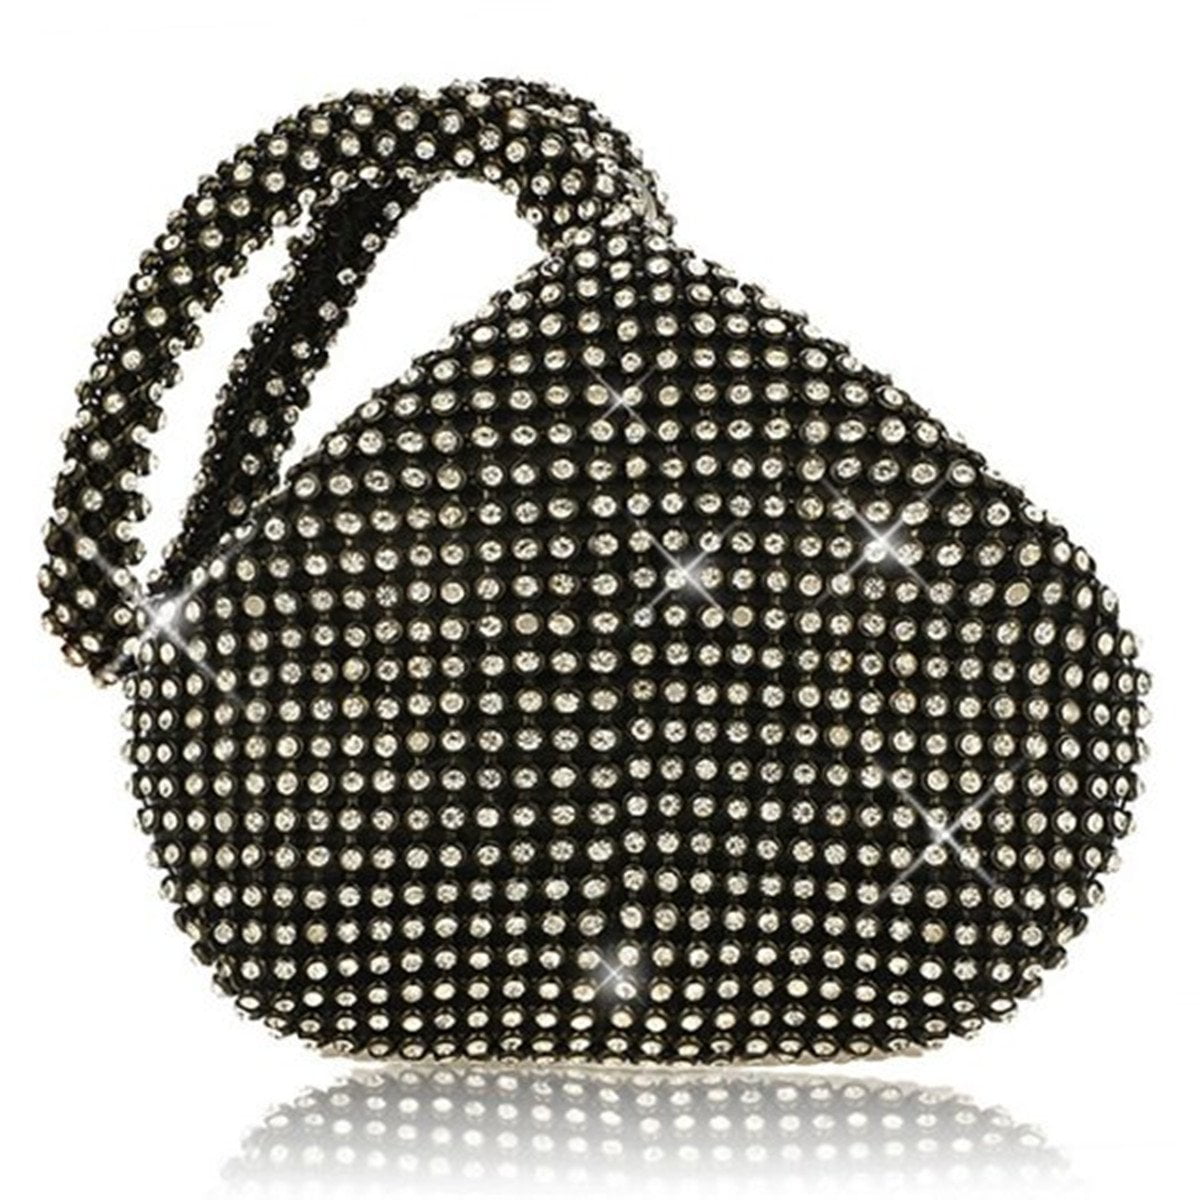 Ladies Heart Shaped Clutch Bags Womens Sparkly Crystal Evening Prom Party Purse 